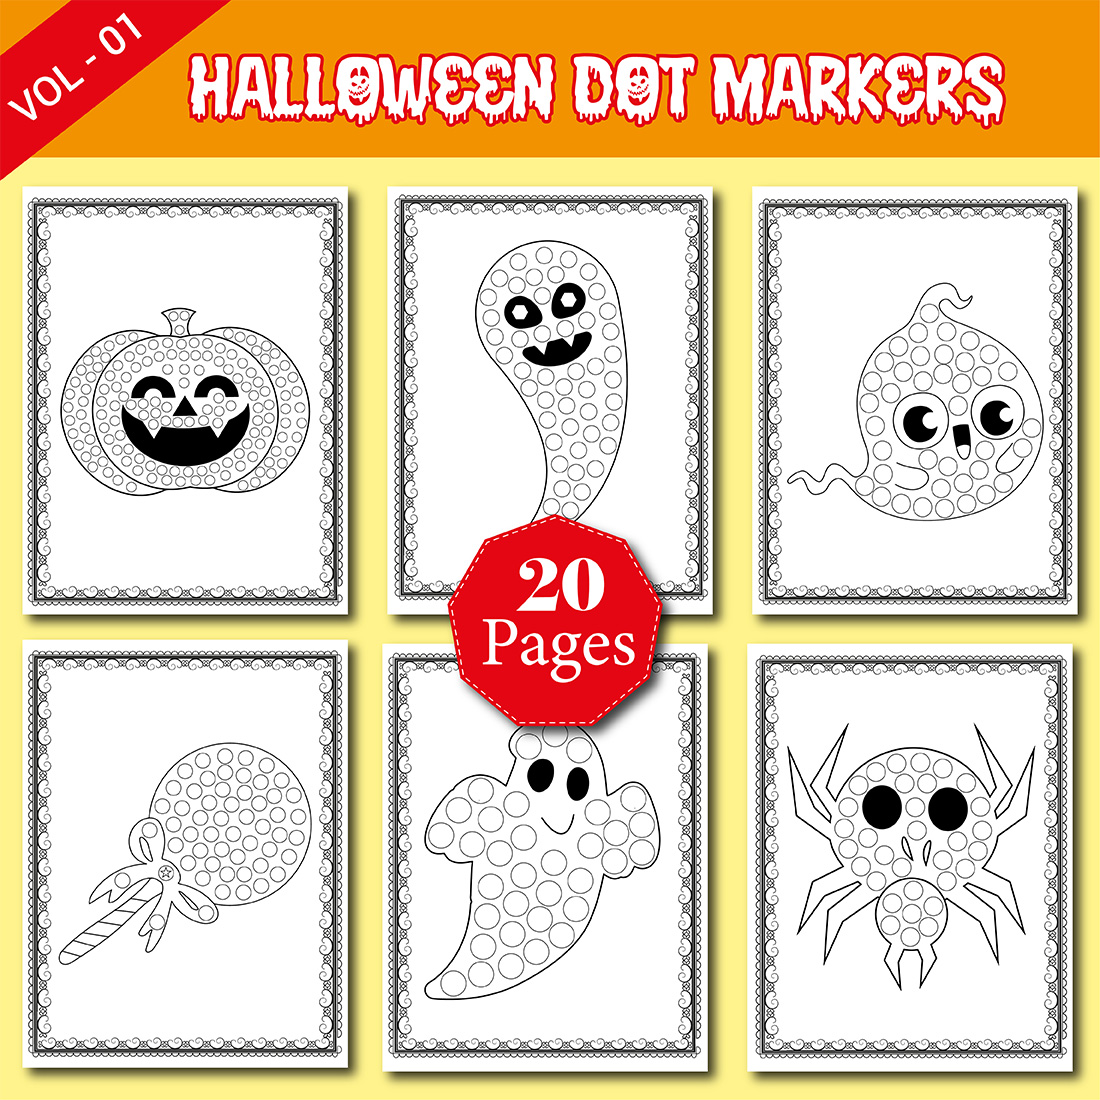 20 Pages Halloween Dot Markers Activity Book cover image.